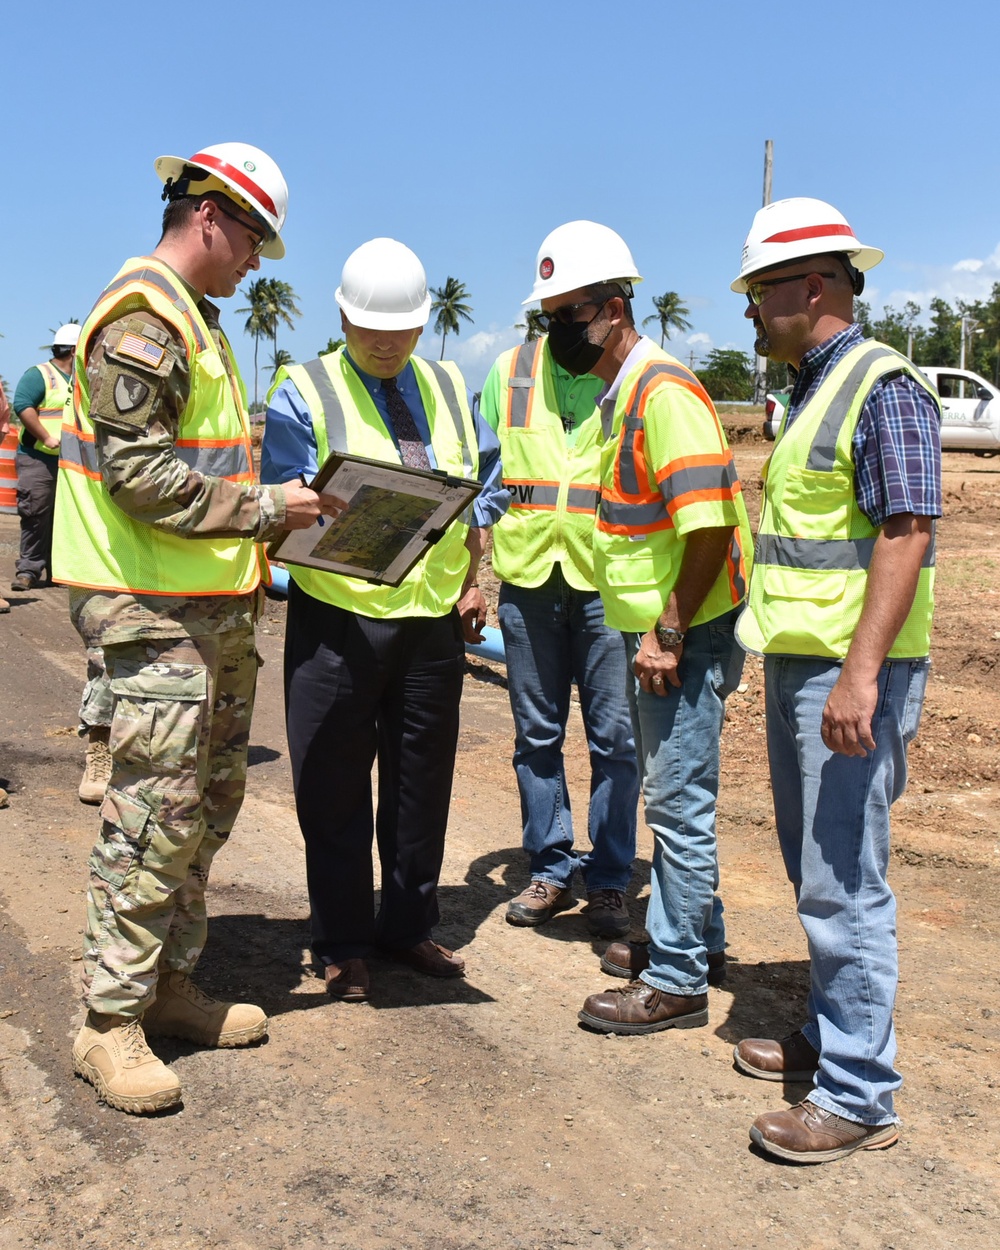 The Assistant Chief of the Army Reserve (ACAR), Stephen Austin, visited USAG Fort Buchanan June 7-8, 2022 as part of an Installation Resiliency Tour. The tour included an overview of various energy efficient and sustainability initiatives such as the sola